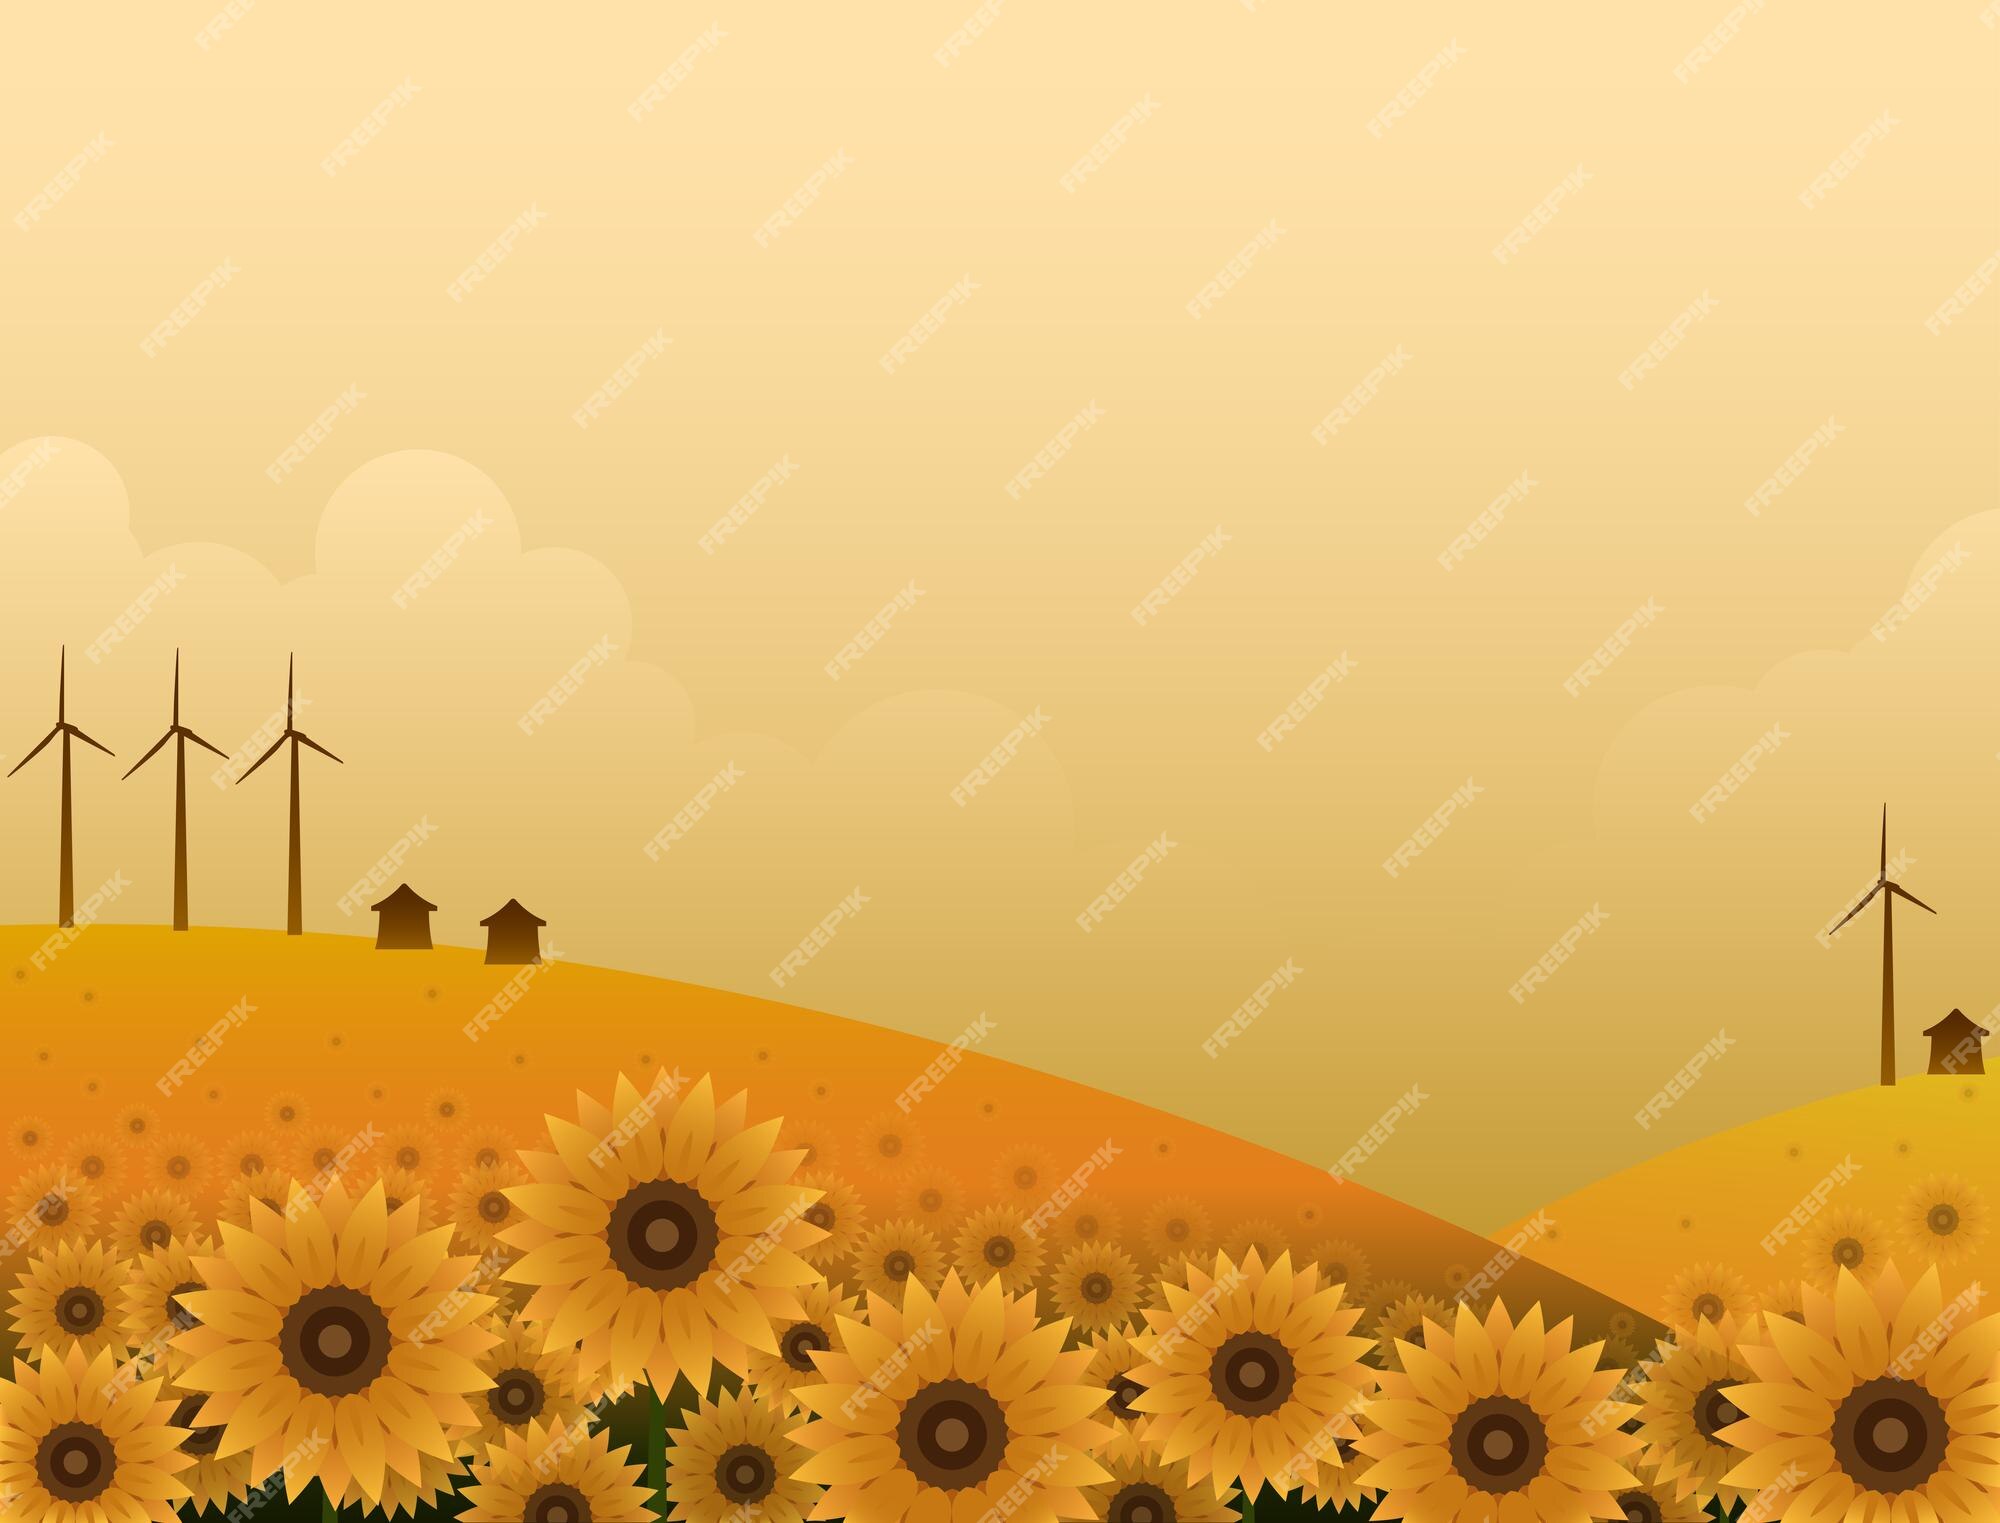 Premium Vector | The sunflower garden that stretches out is very wide